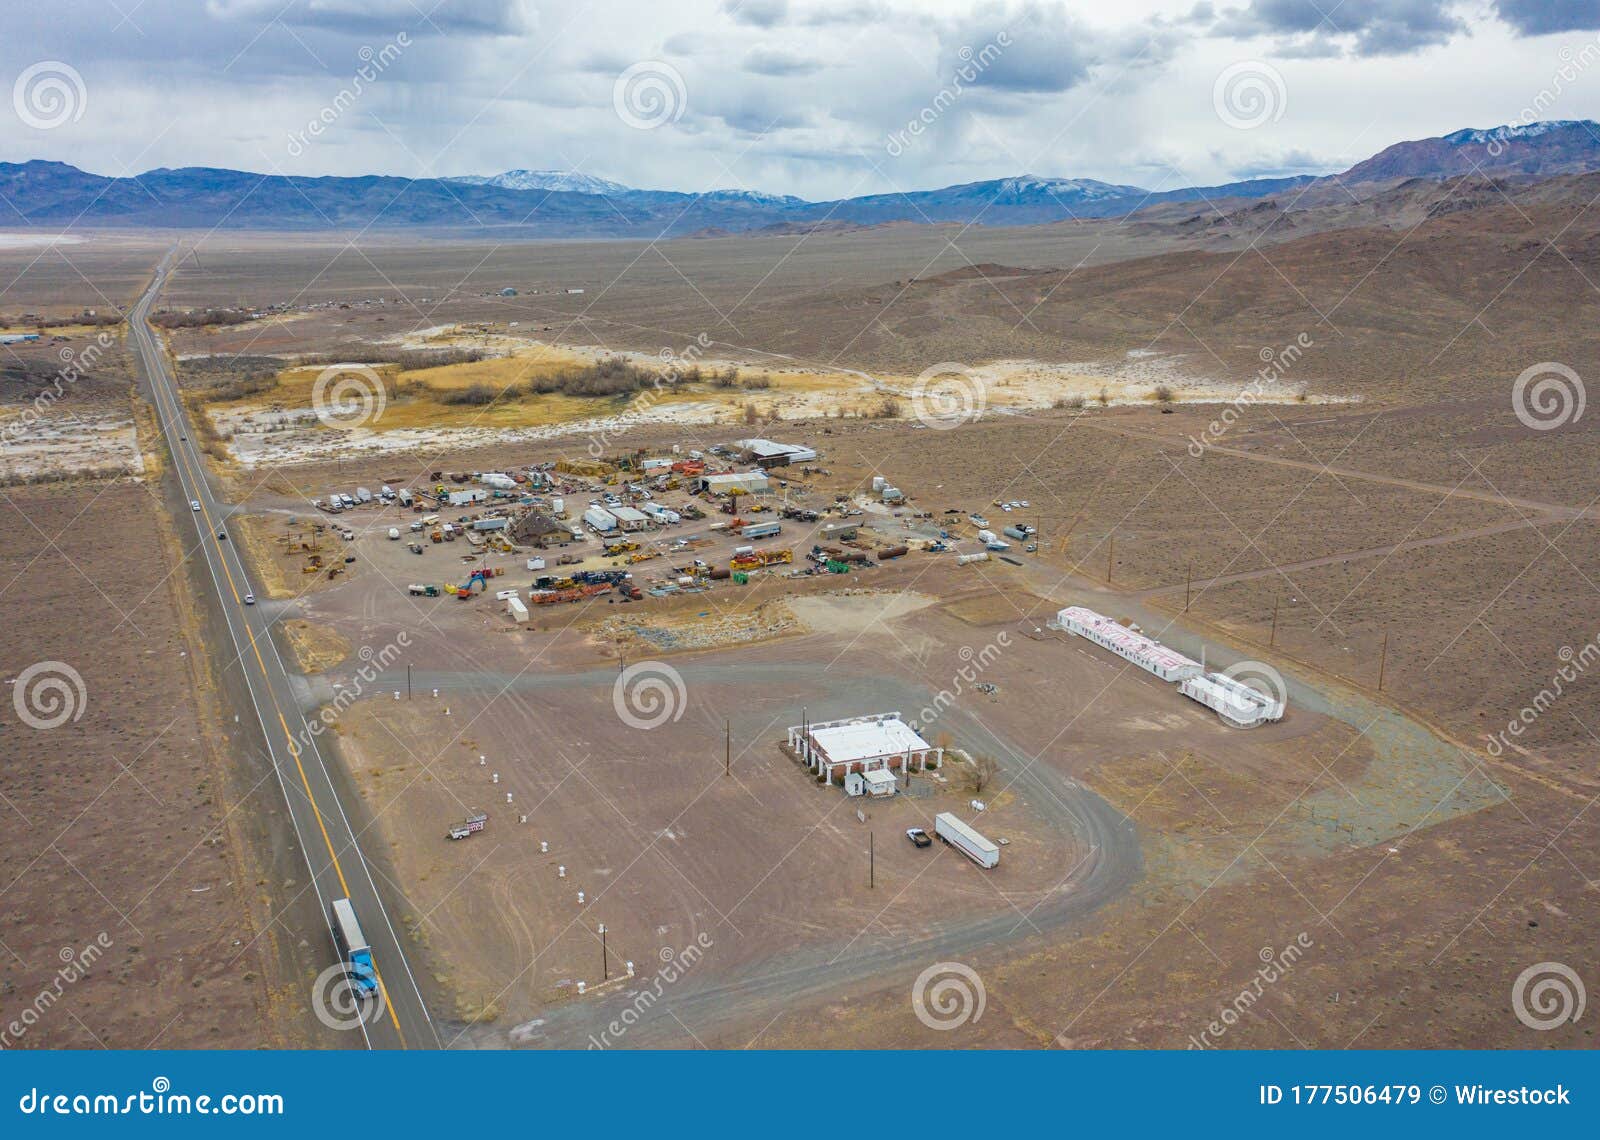 Wildkat Ranch, A Legal Brothel In Nevada Stock Image Image of ranch